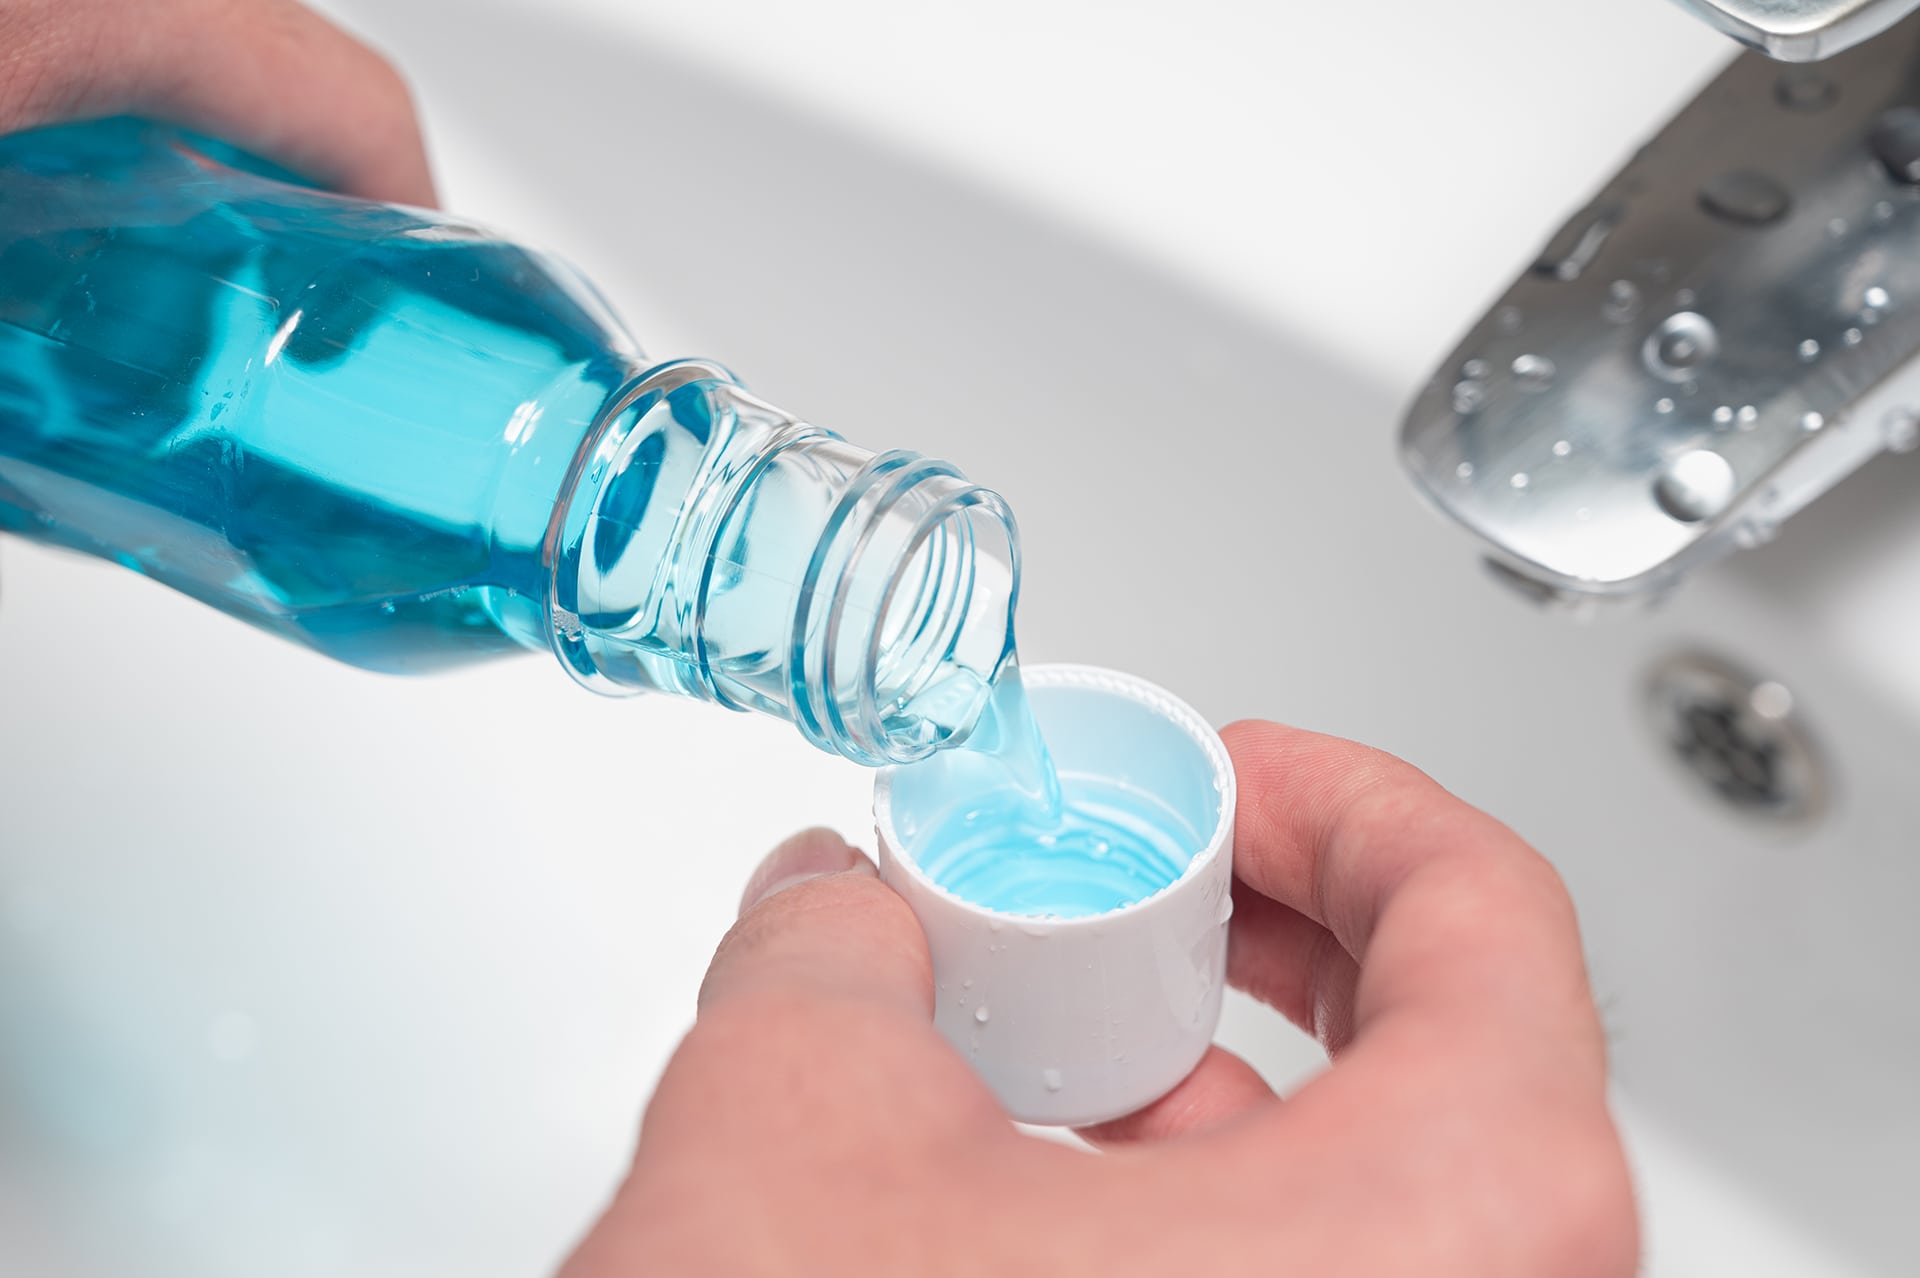 Is it worth using mouthwash?